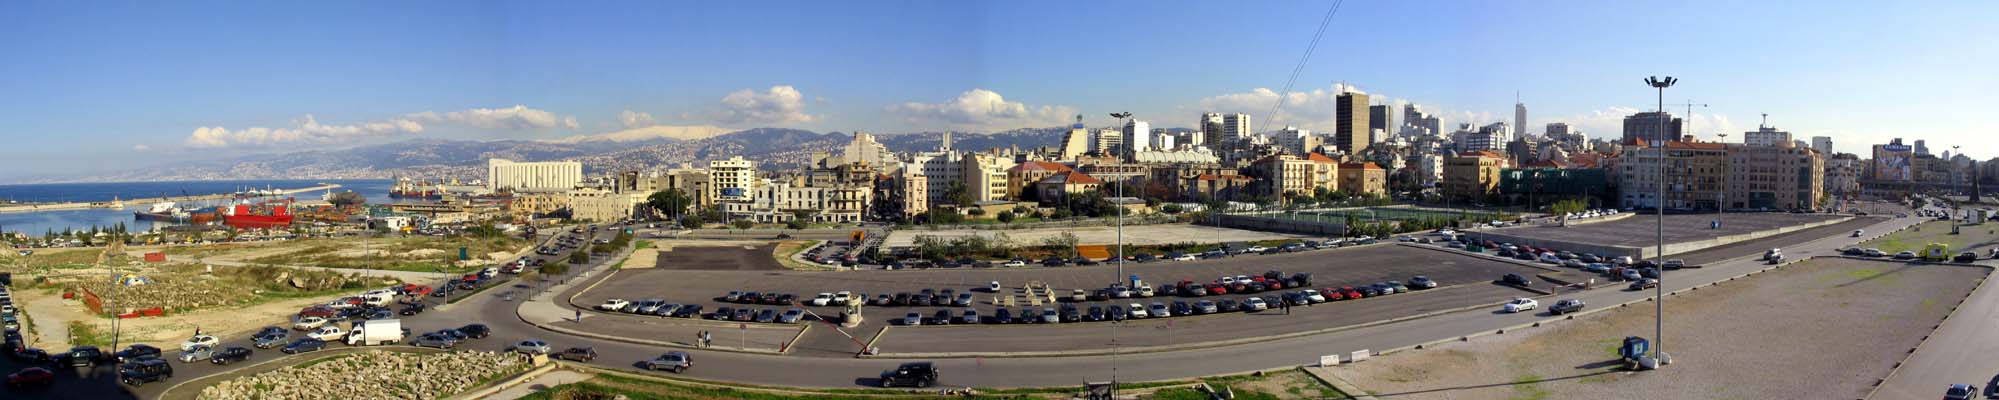 Panoramic view of Martyr's Square looking east with Beirut's harbor on the left and the ring road on the right